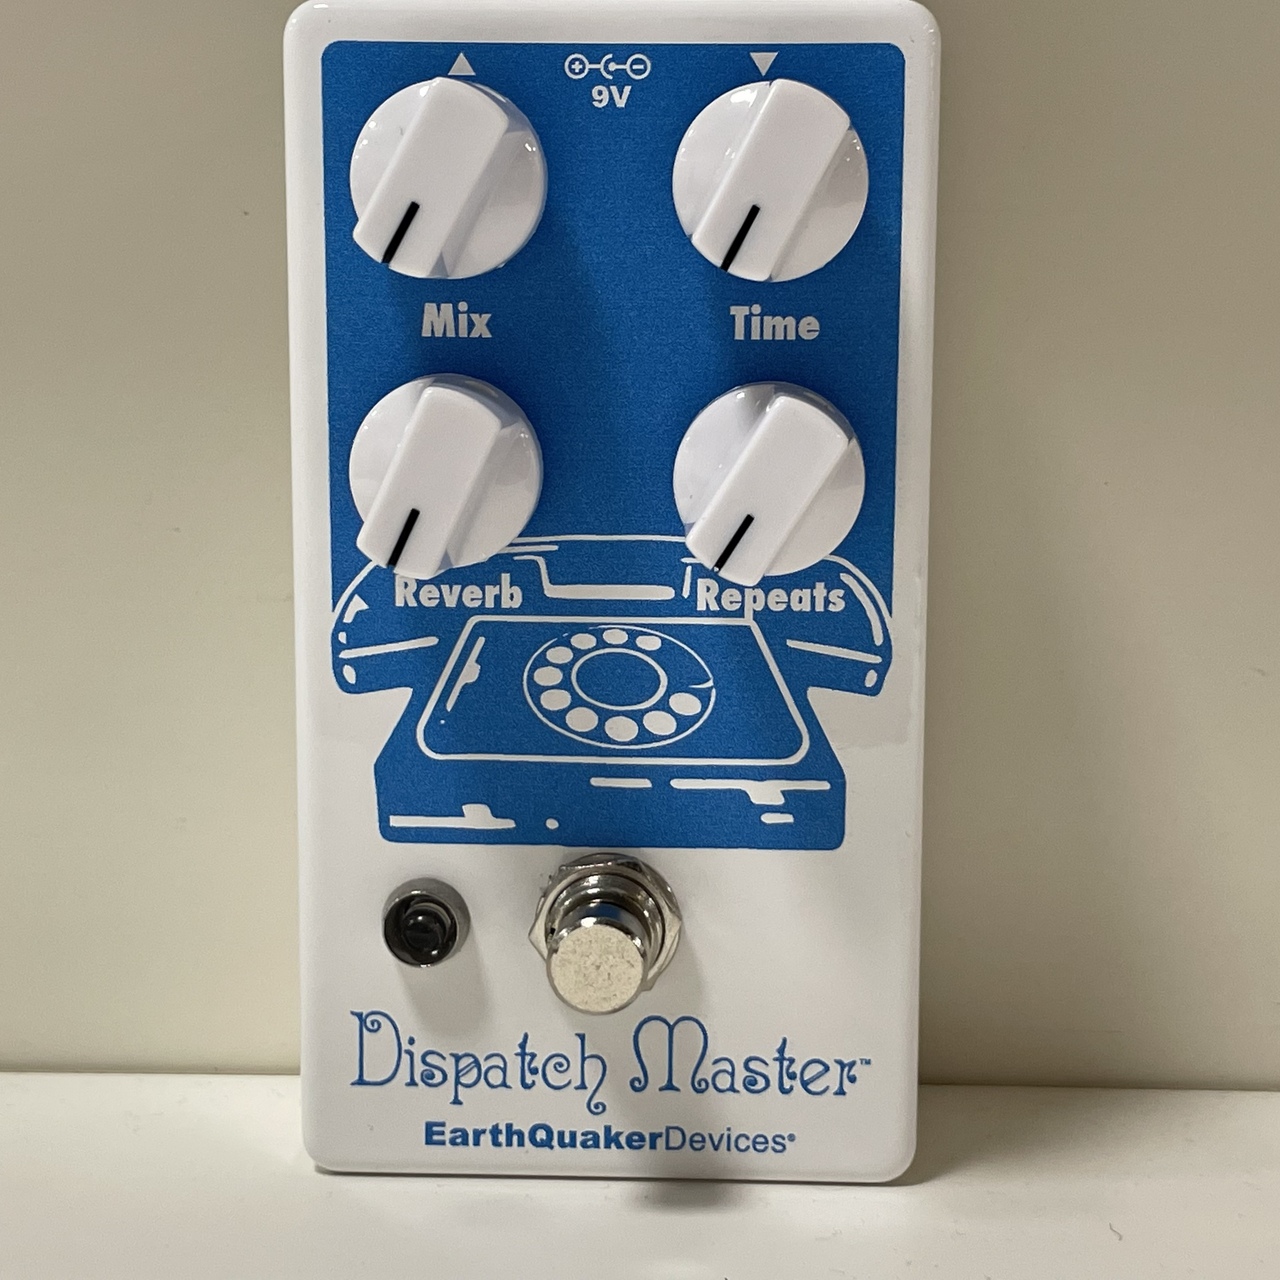 Earth Quaker Devices Dispatch Master | www.piazzagrande.it